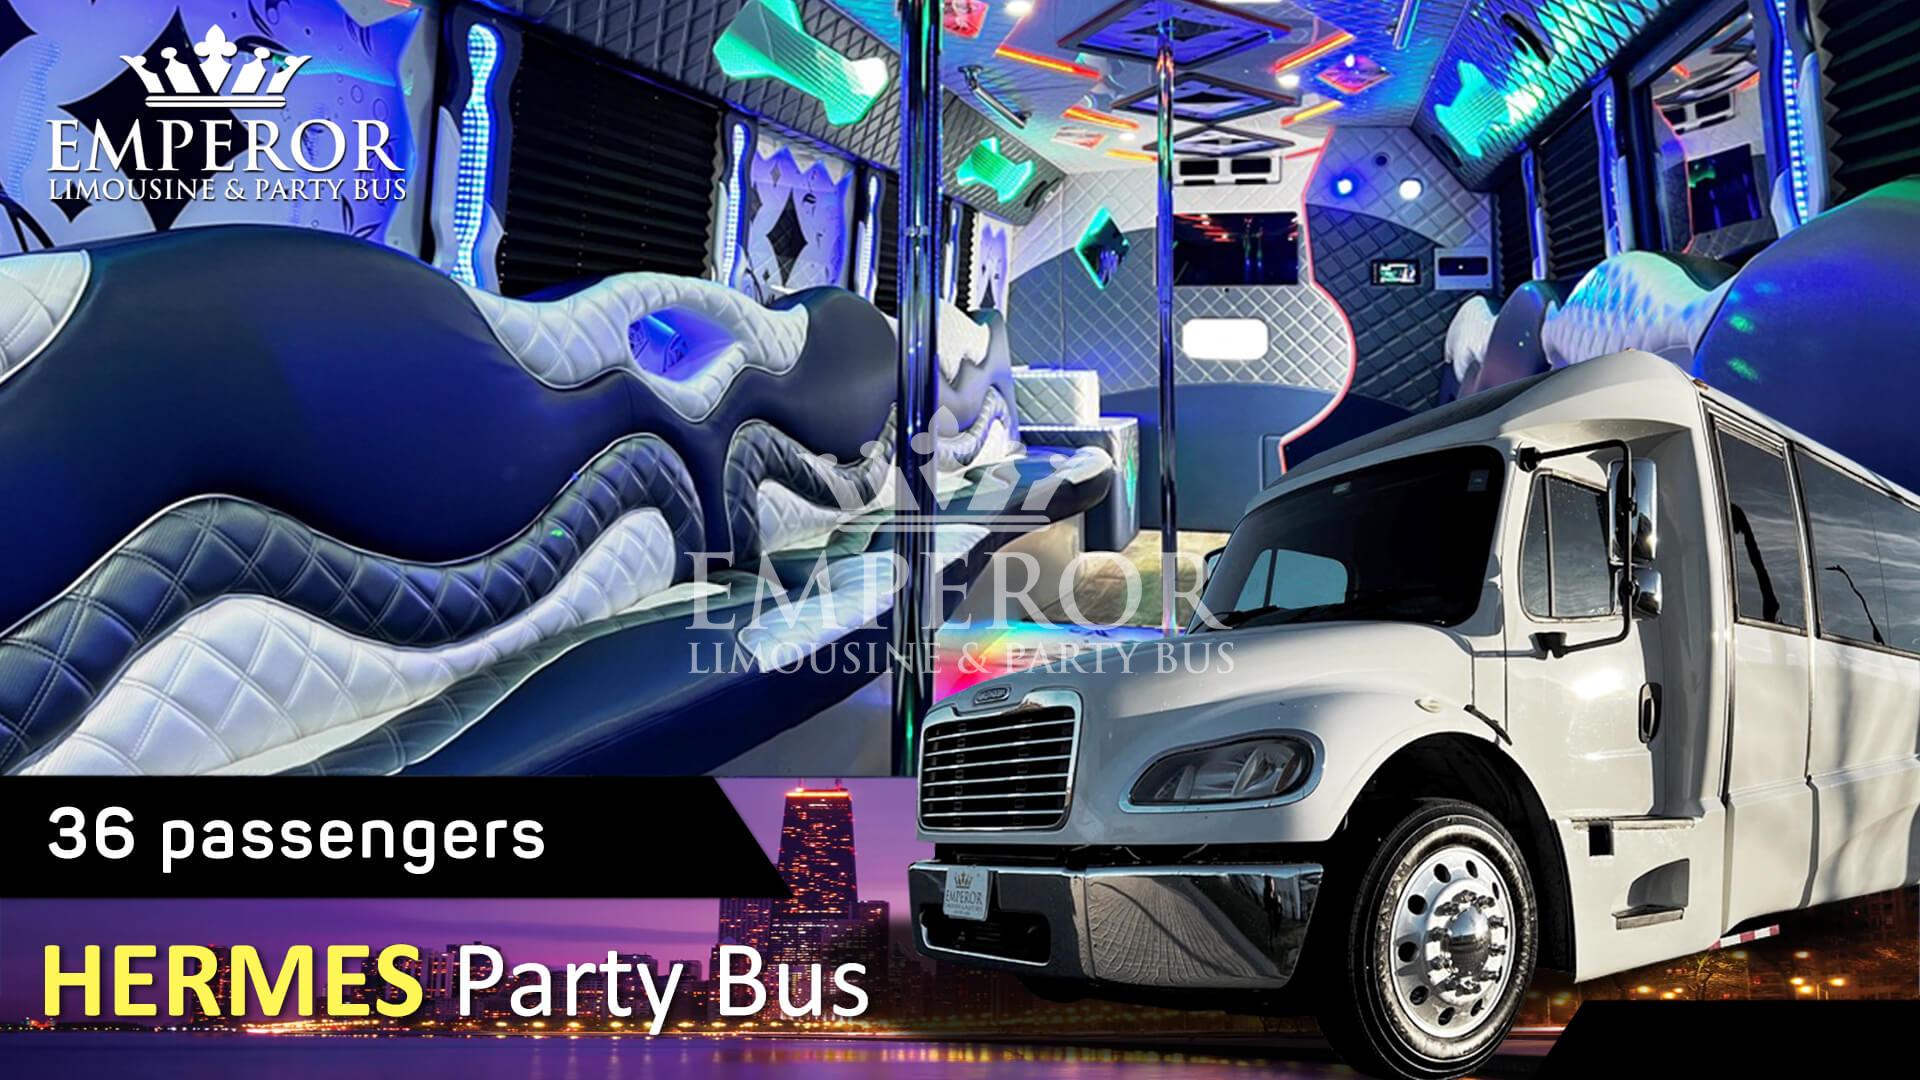 Bachelor Party bus rental in Chicago, IL - Hermes Edition